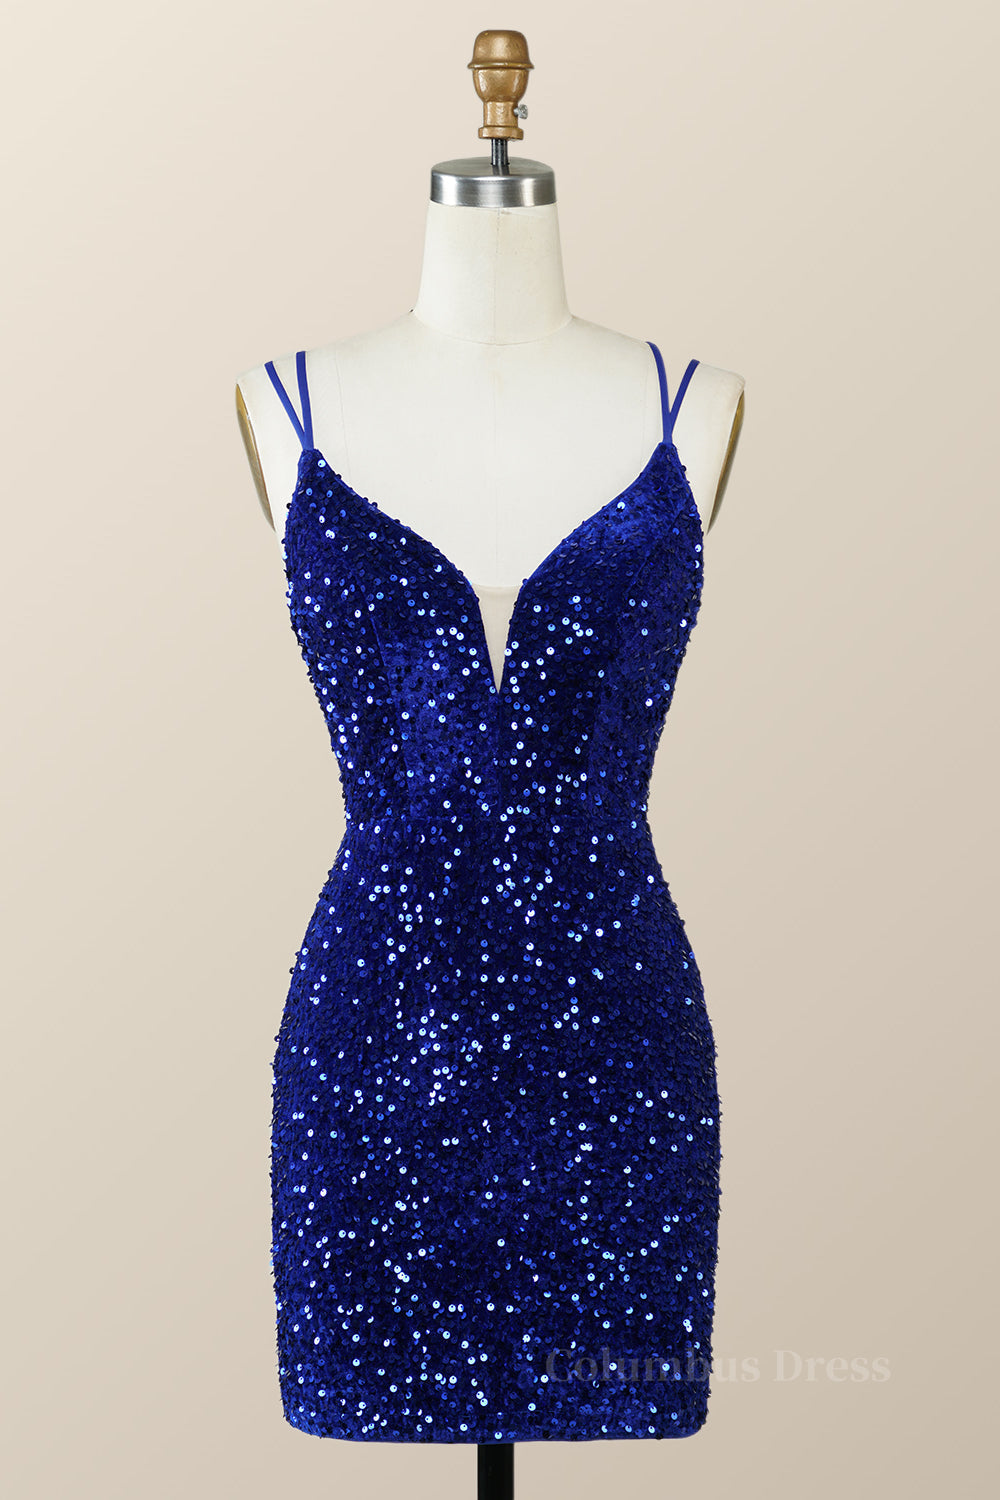 Formal Dresses Outfits, Royal Blue Sequin Tight Mini Dress with Double Straps